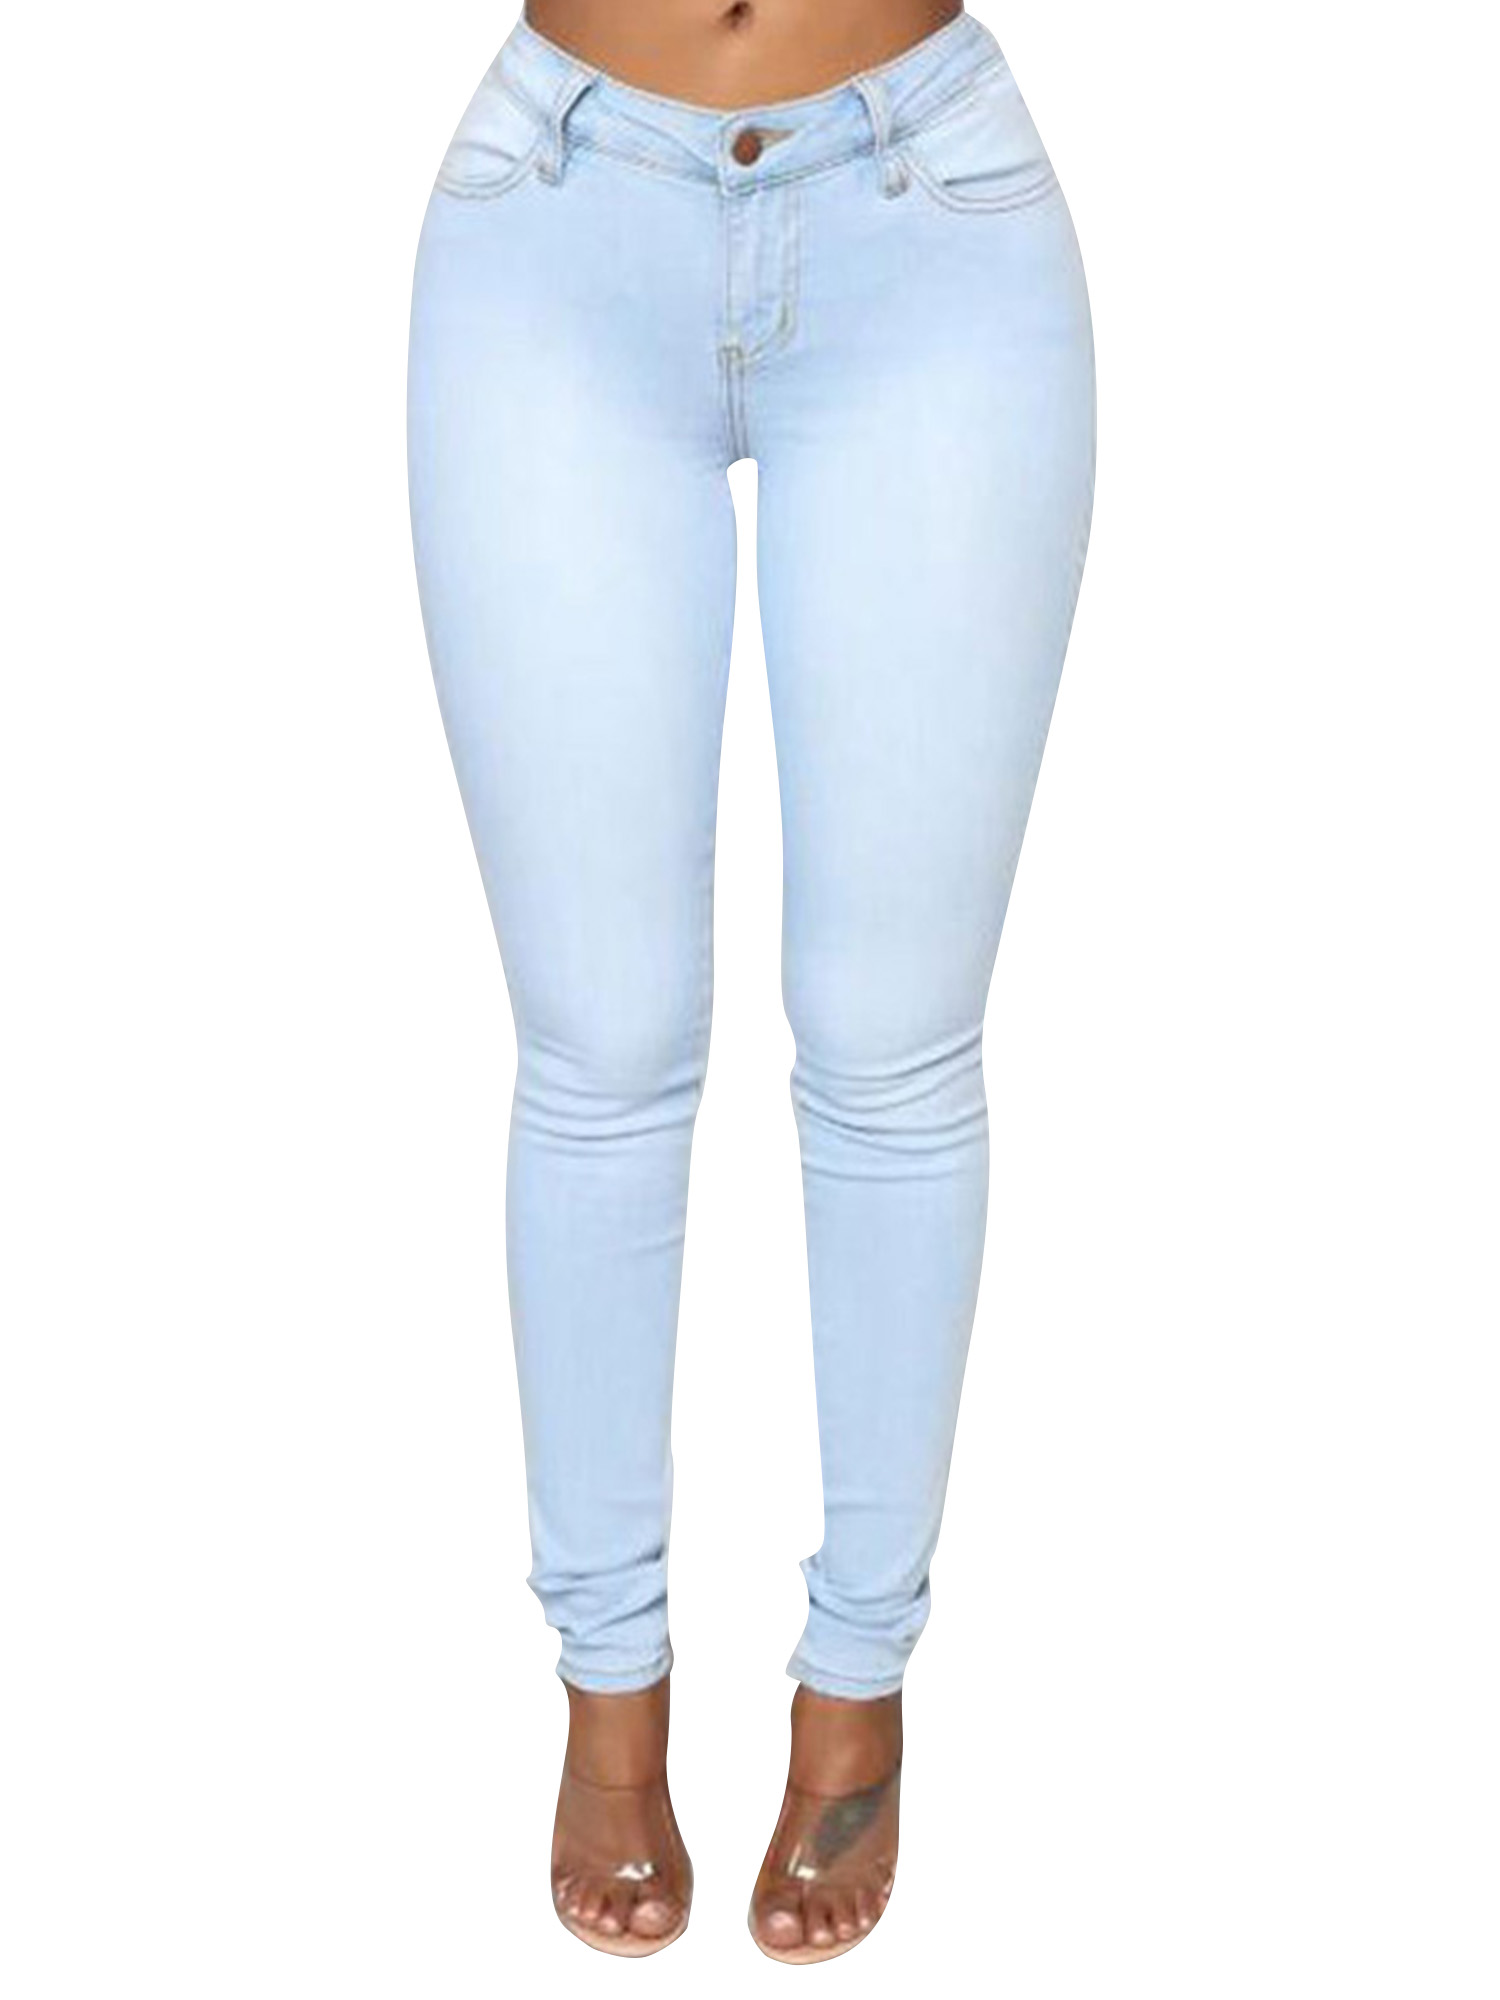 Women High Rise Distressed Solid Stretch Sexy Skinny Leg Denim Jeans Bodycon Jeggings Pencil Pants Trousers With Pockets - image 4 of 5